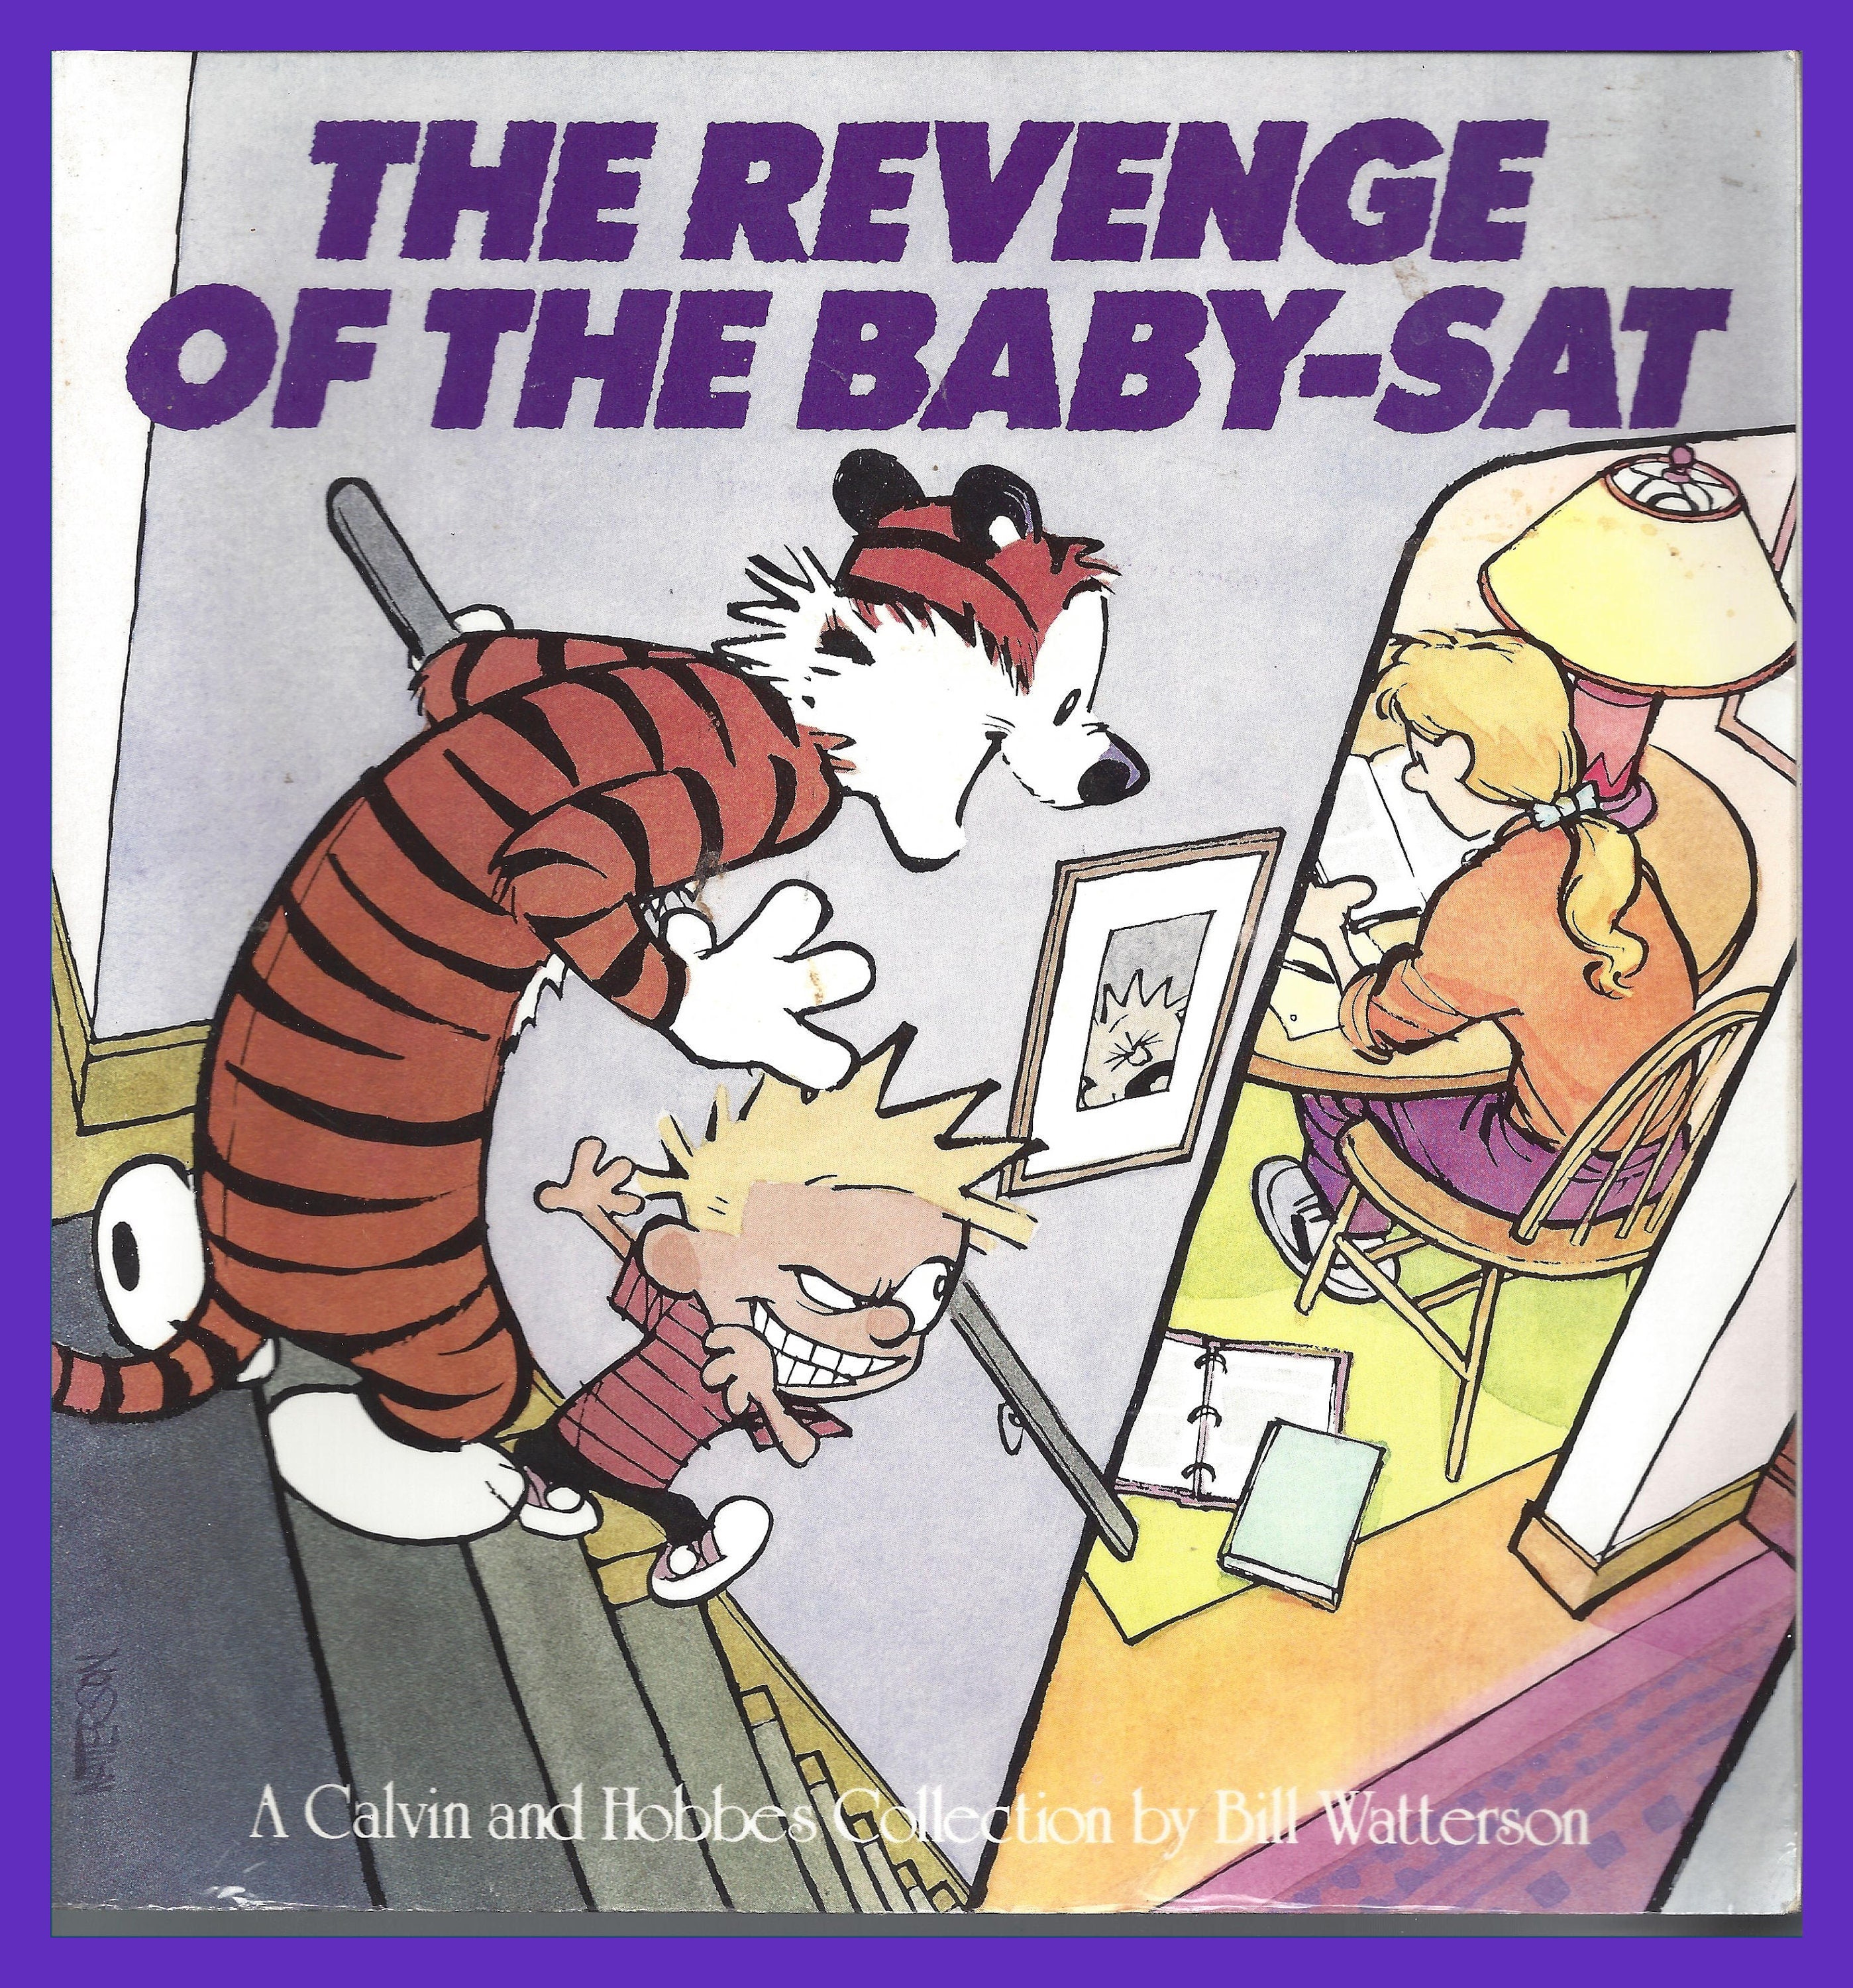 Calvin and Hobbes REVENGE of the BABY Sat Comics Book 1991 - Etsy